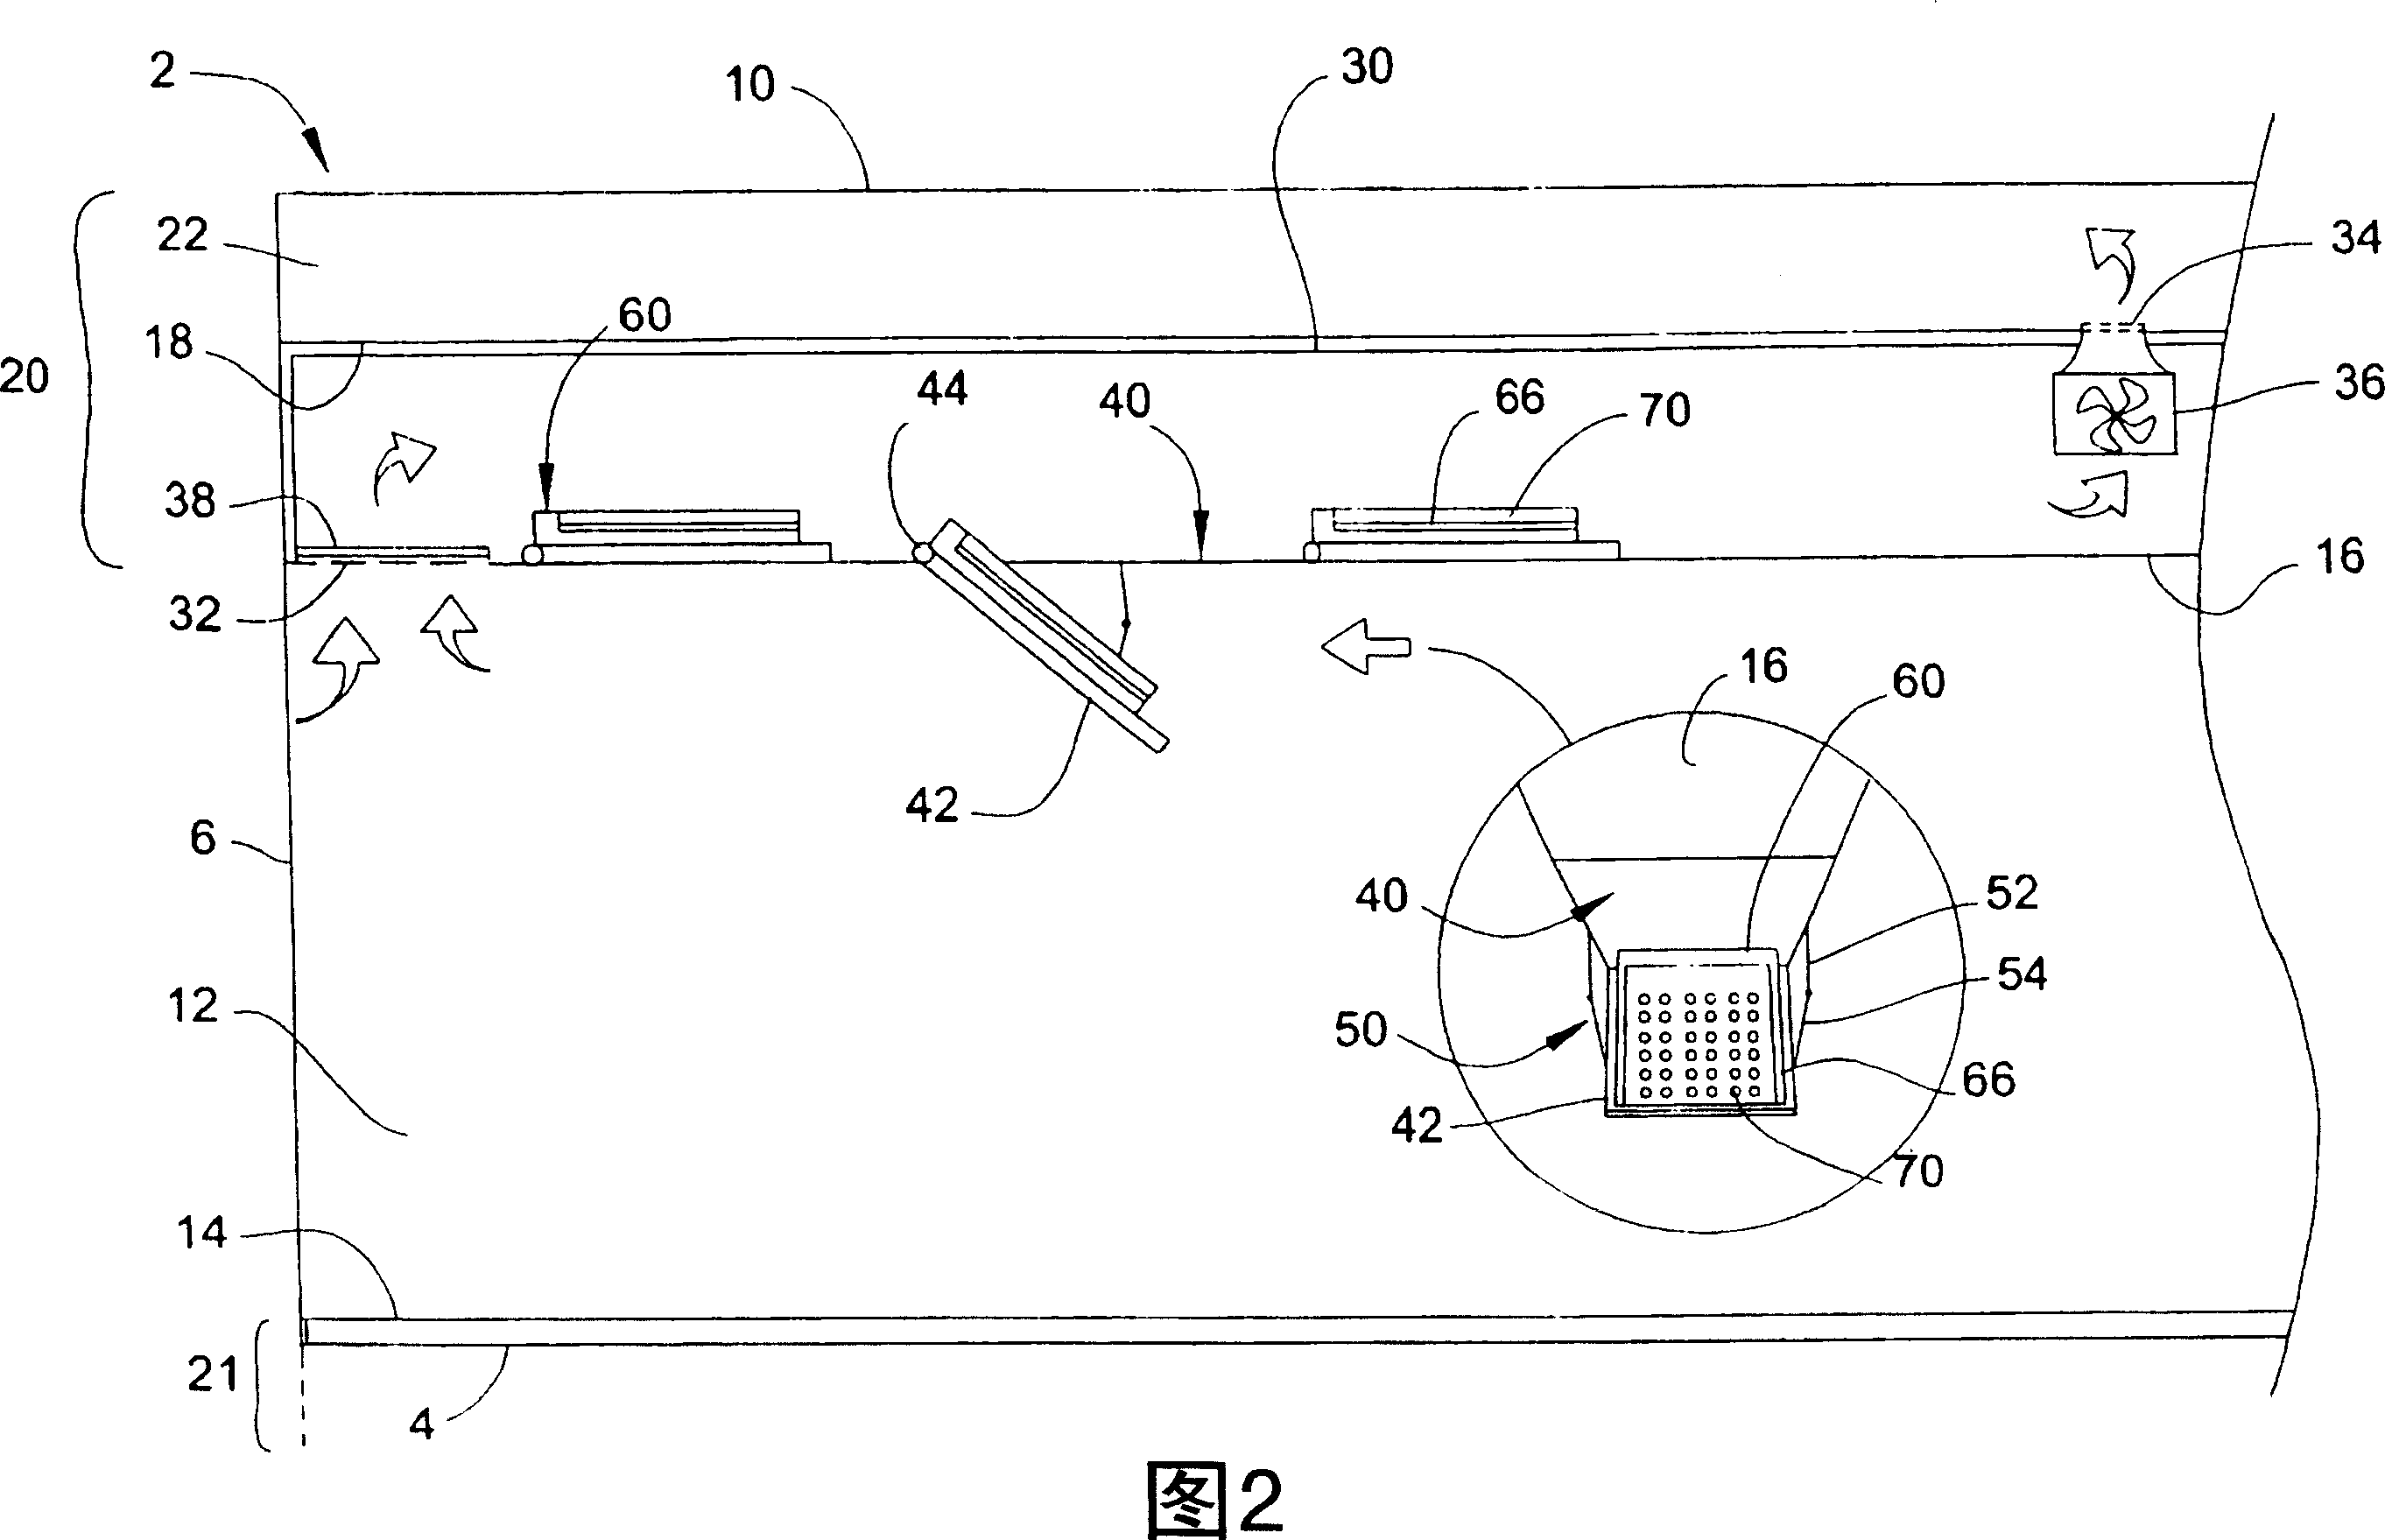 Storage system for electrical equipment in vehicles